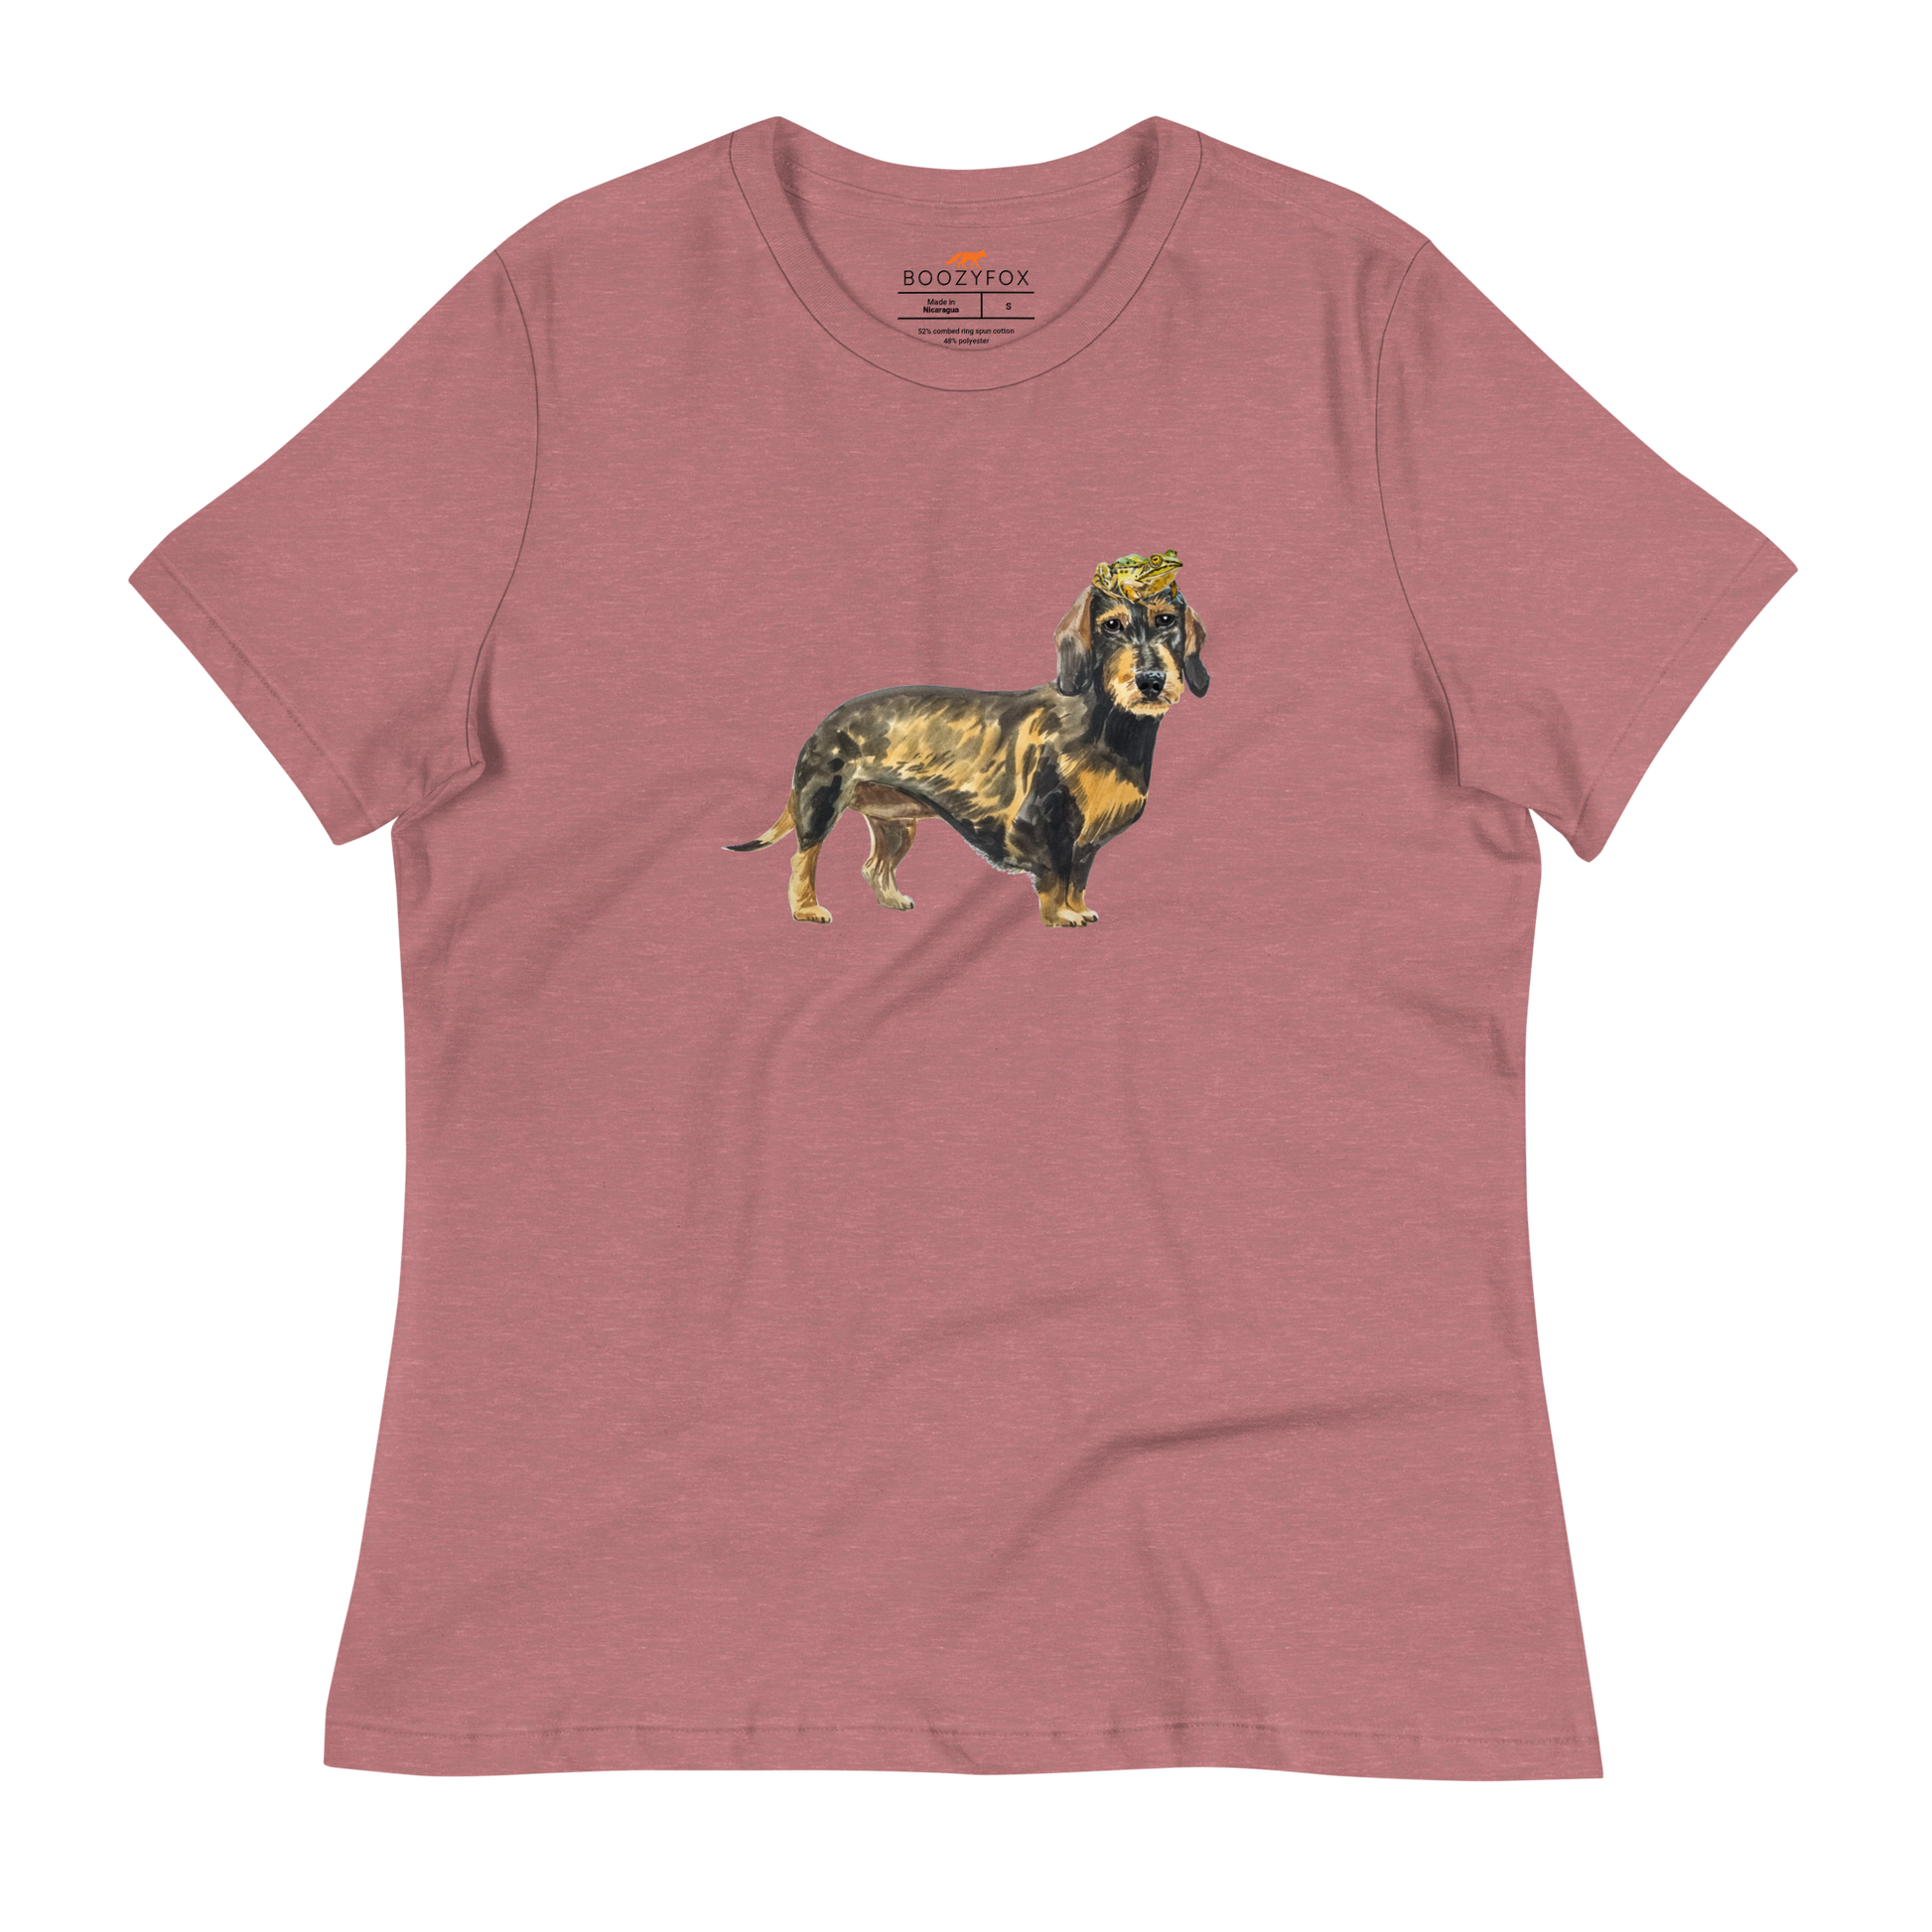 Women's relaxed heather mauve Dachshund t-shirt featuring a charming Frog on a Dachshund's Head graphic on the chest - Women's Cute Graphic Dachshund Tees - Boozy Fox